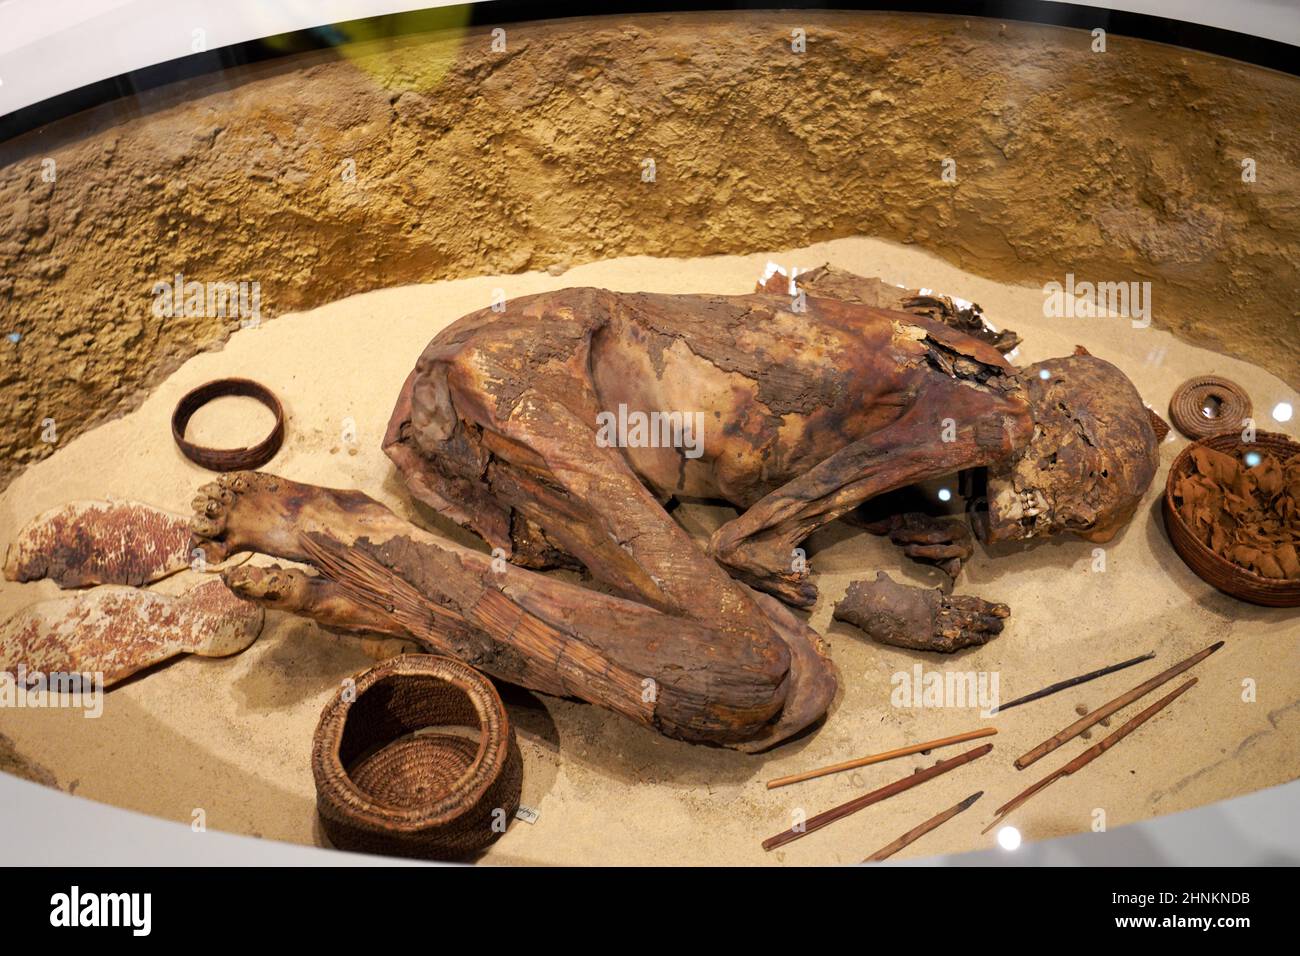 TURIN, ITALY - AUGUST 19, 2021: Mummy in fetal position. Mummification of one body during the Egyptian civilization, Egyptian Museum of Turin, Italy Stock Photo